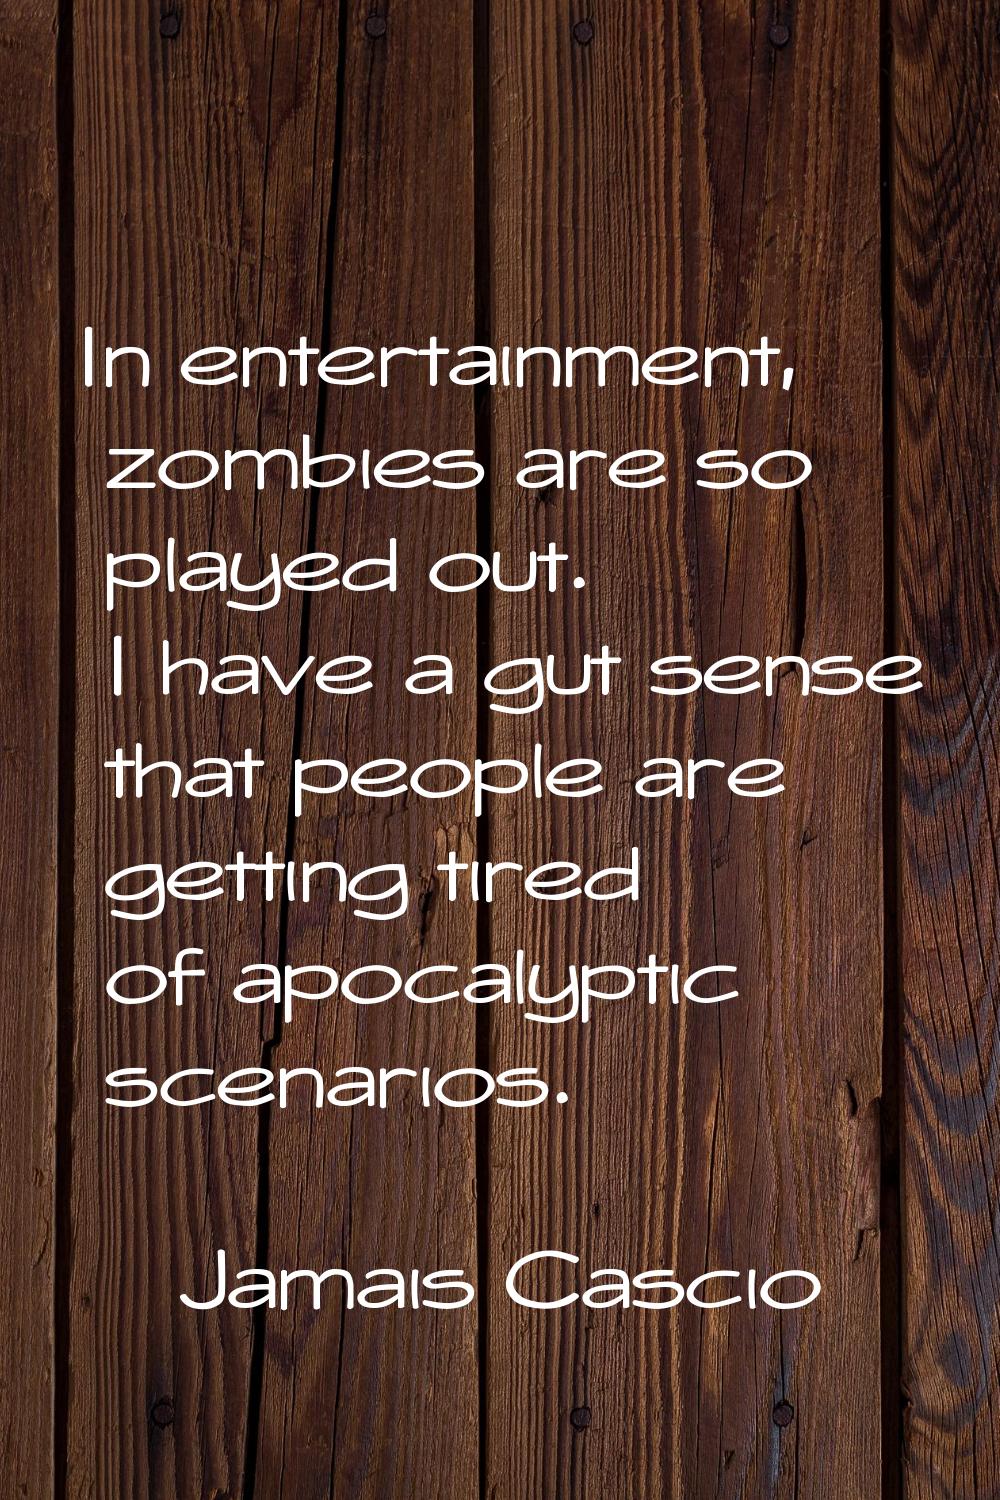 In entertainment, zombies are so played out. I have a gut sense that people are getting tired of ap